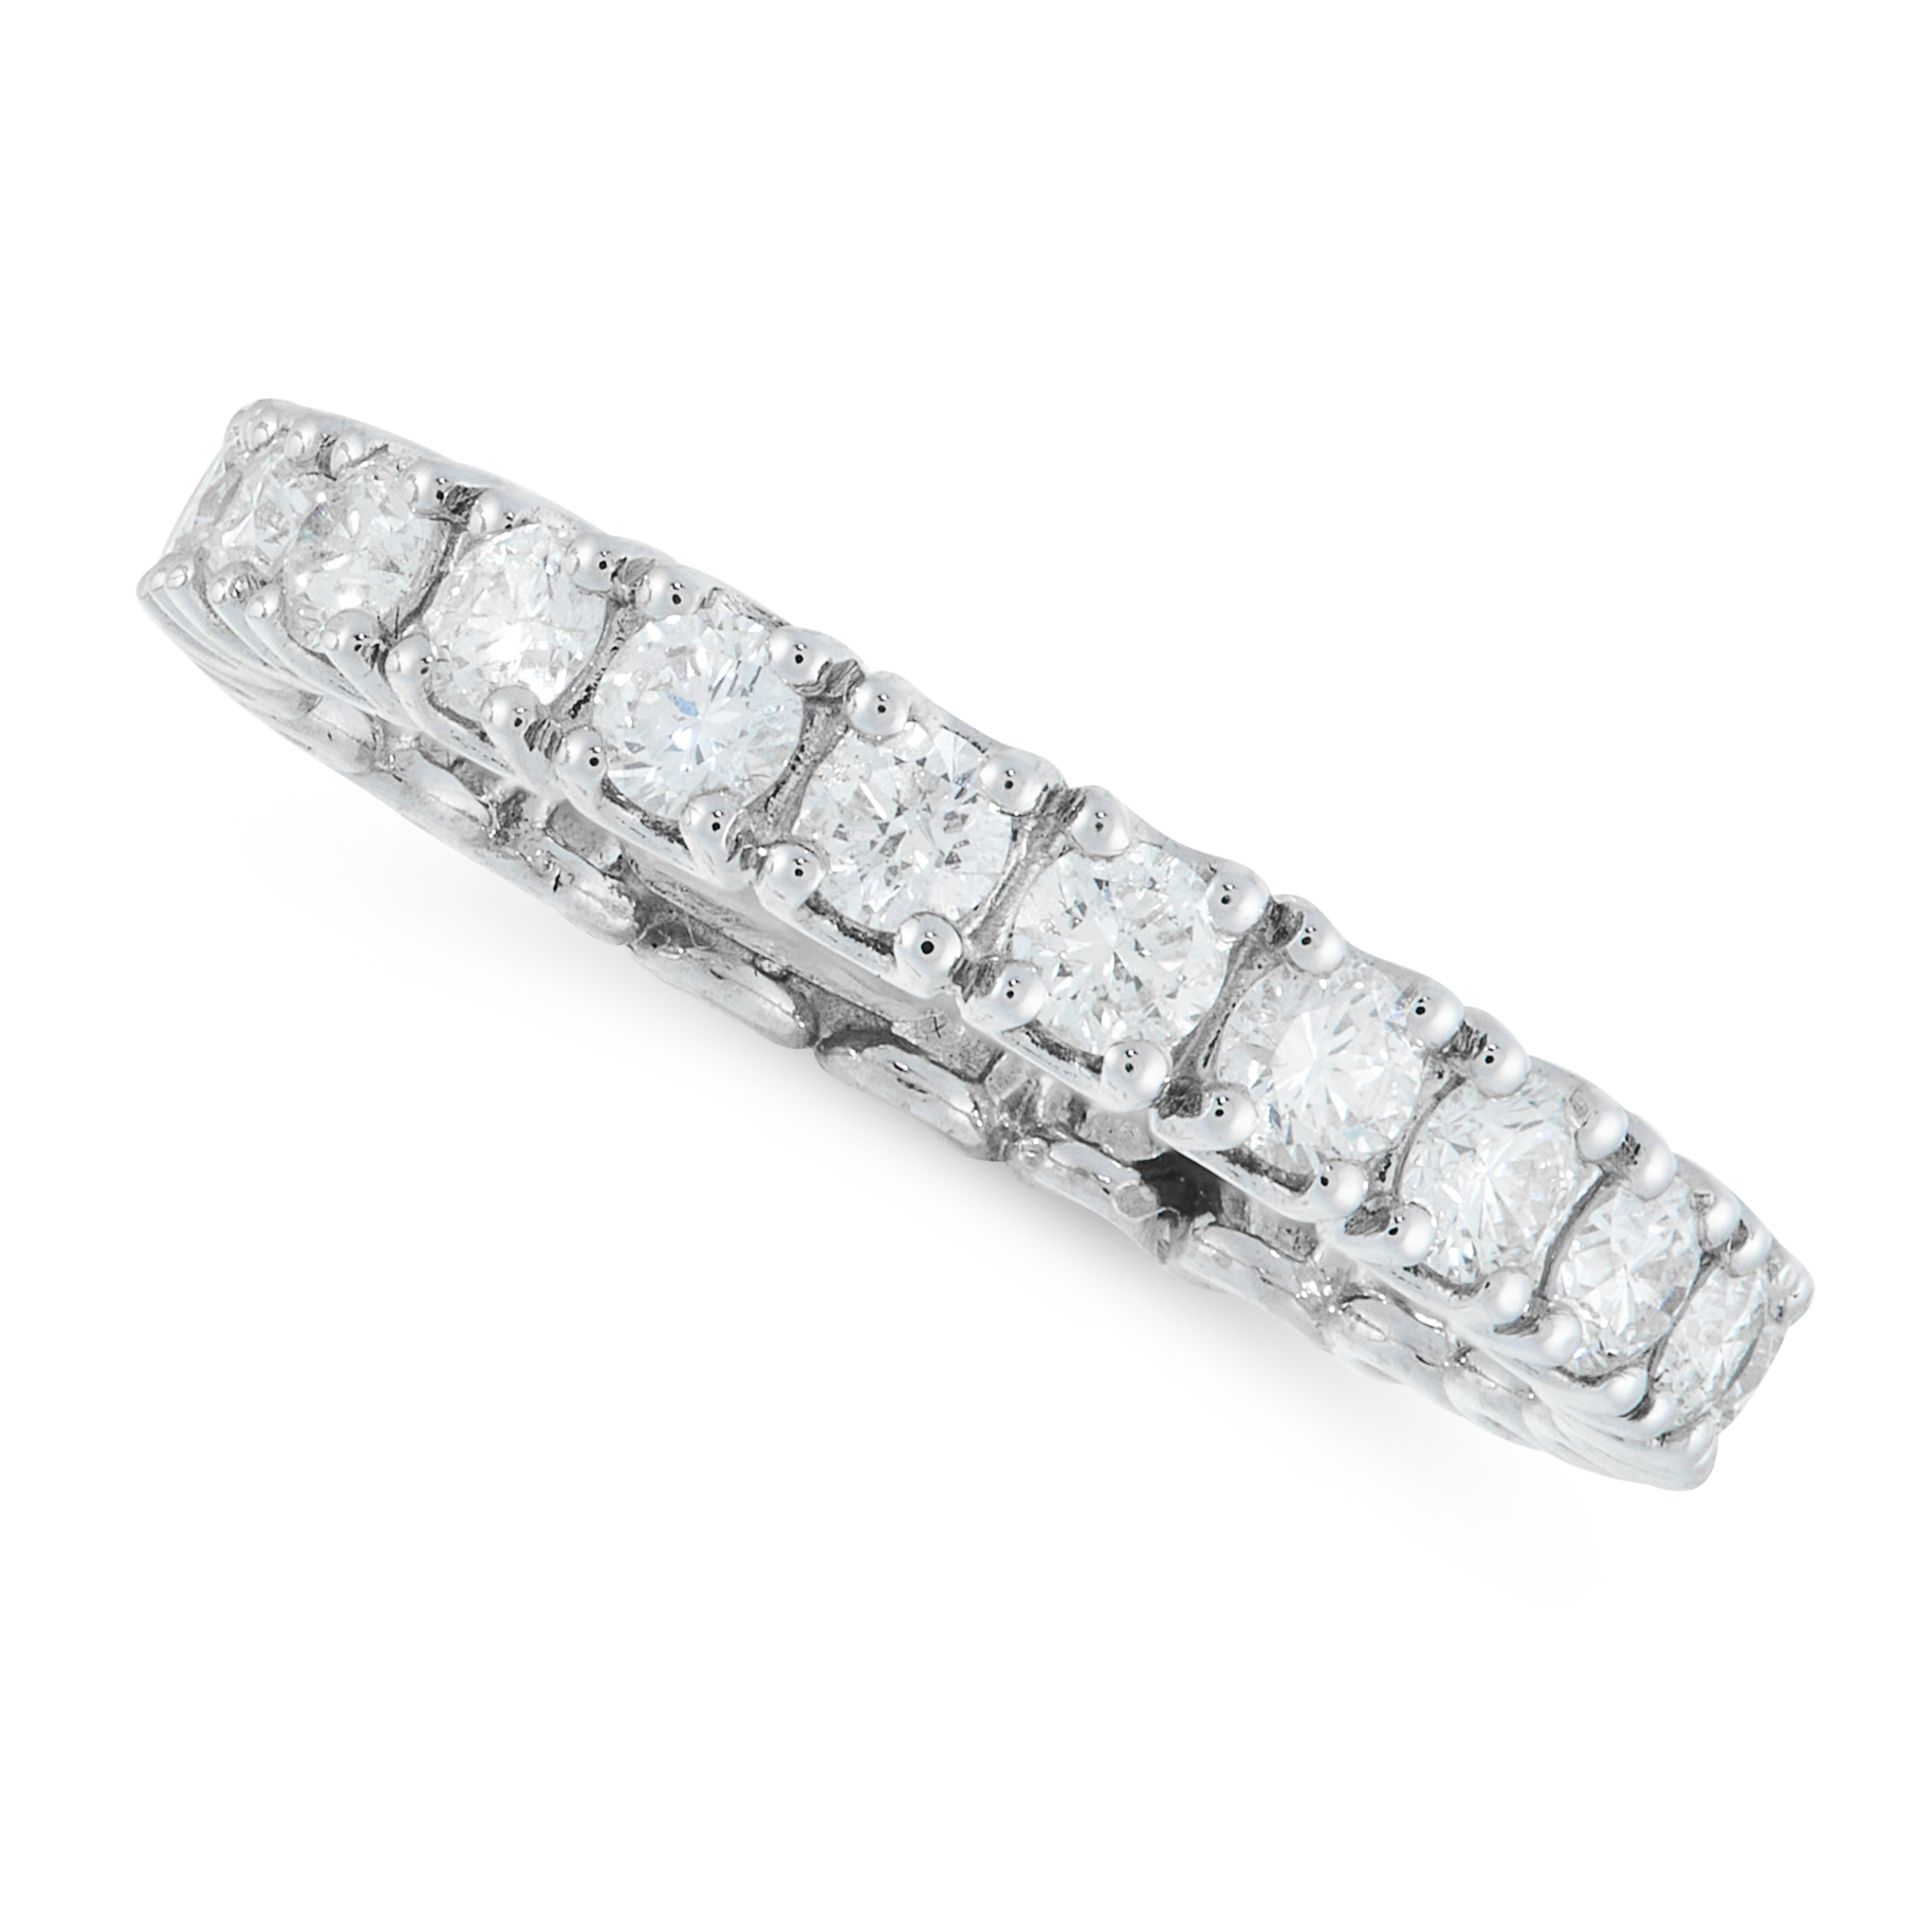 A DIAMOND ETERNITY BAND RING in white gold, designed as a full eternity, set with round cut diamonds